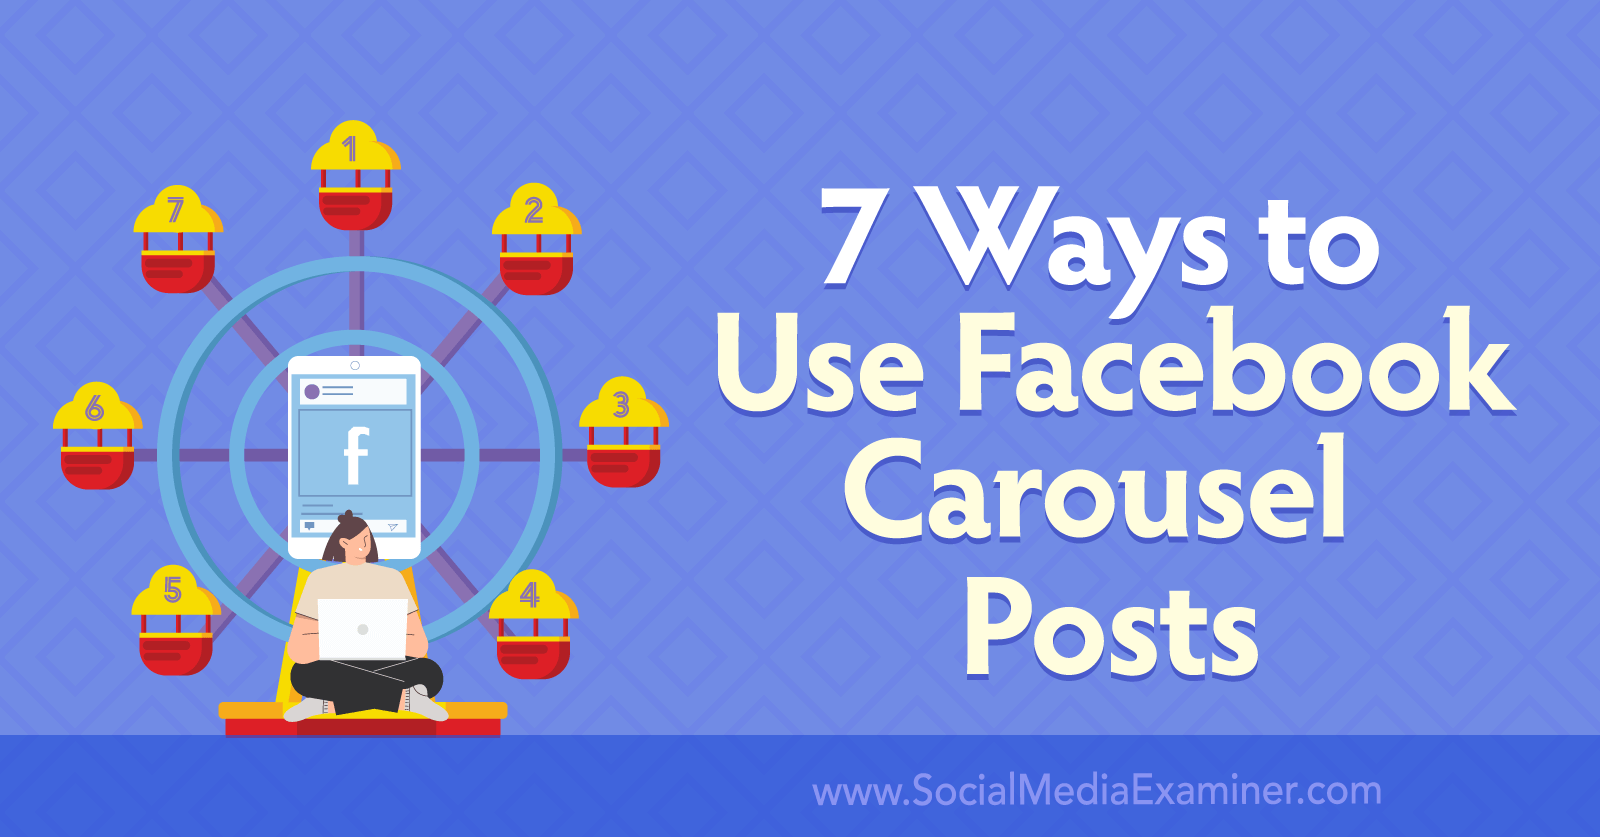 7 Ways to Use Facebook Carousel Posts by Anna Sonnenberg